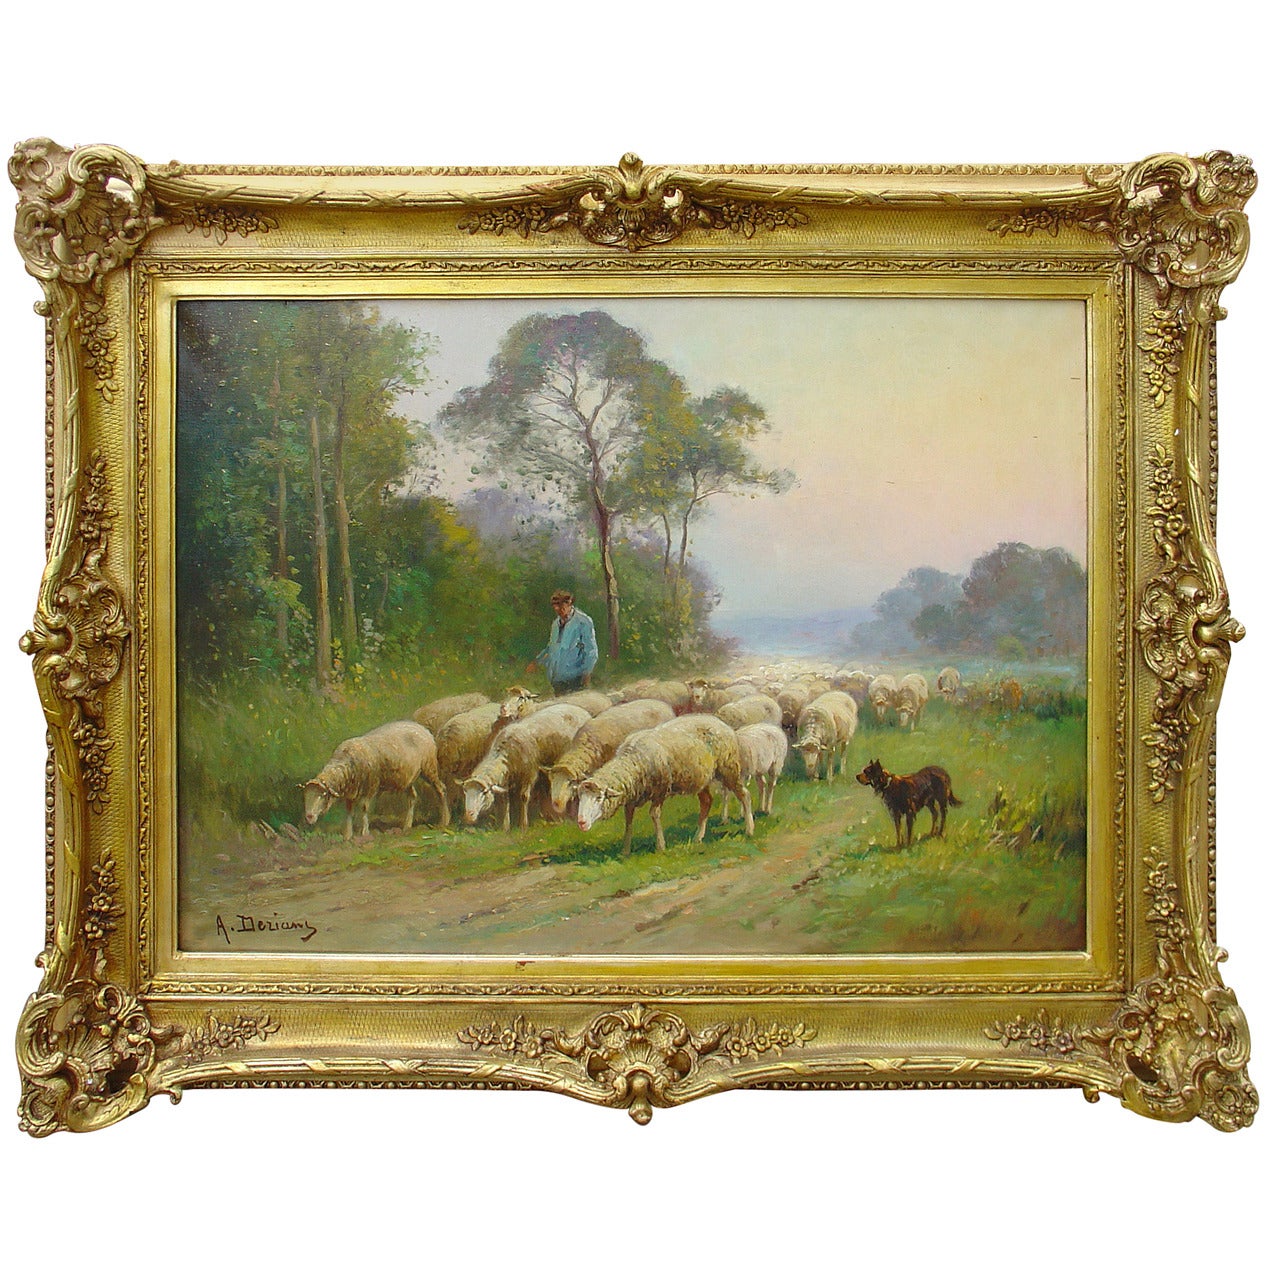 Signed Antique Sheep Painting by Derians